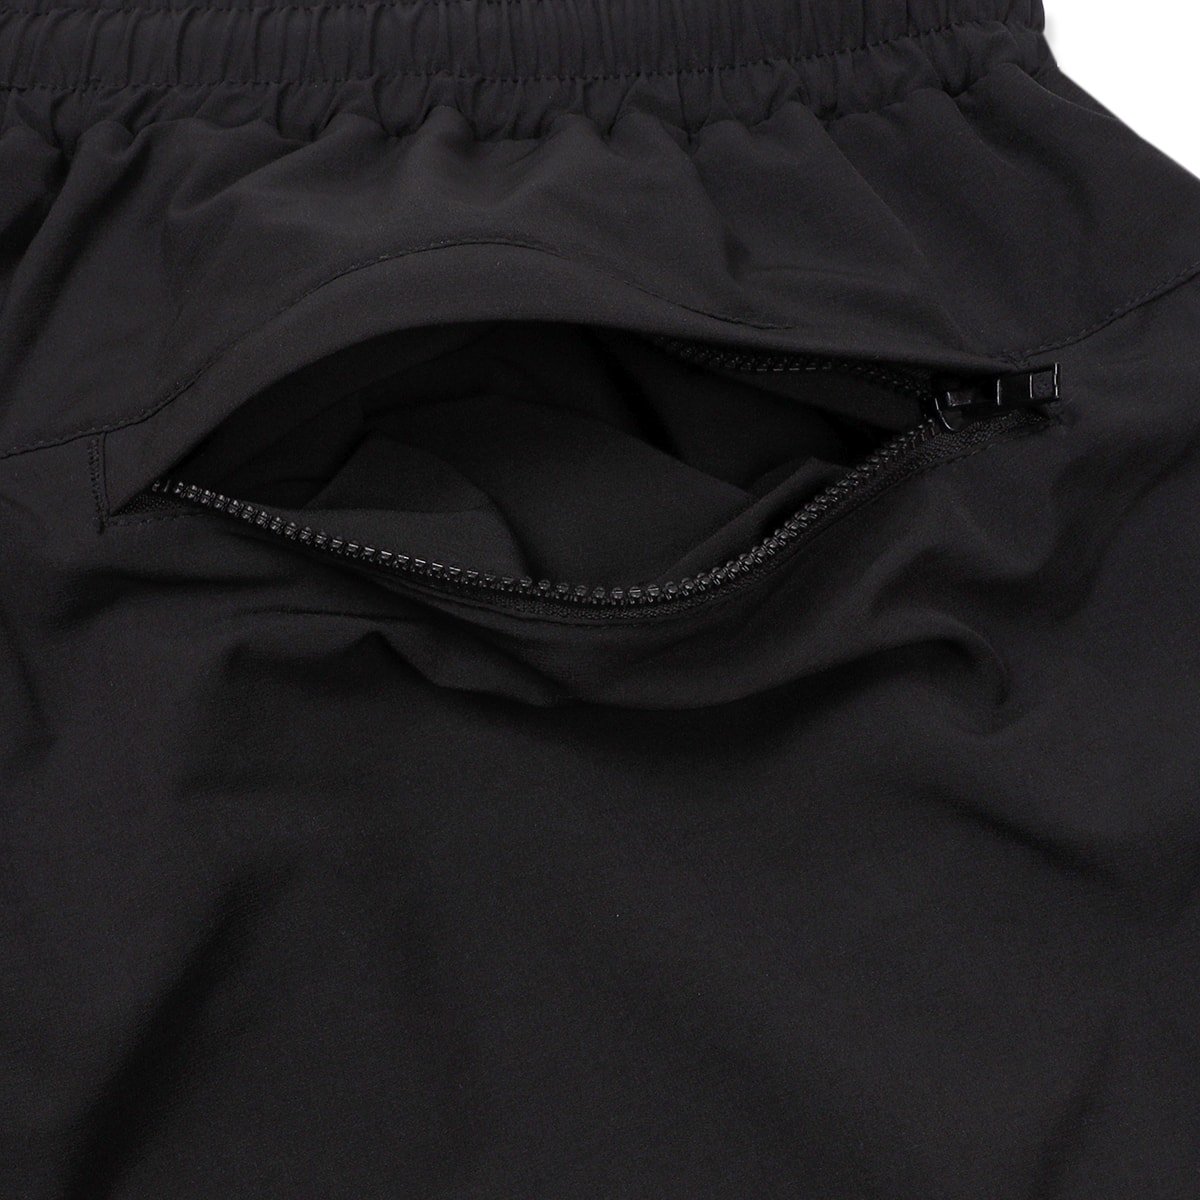 ARCH(アーチ)-classic track pants